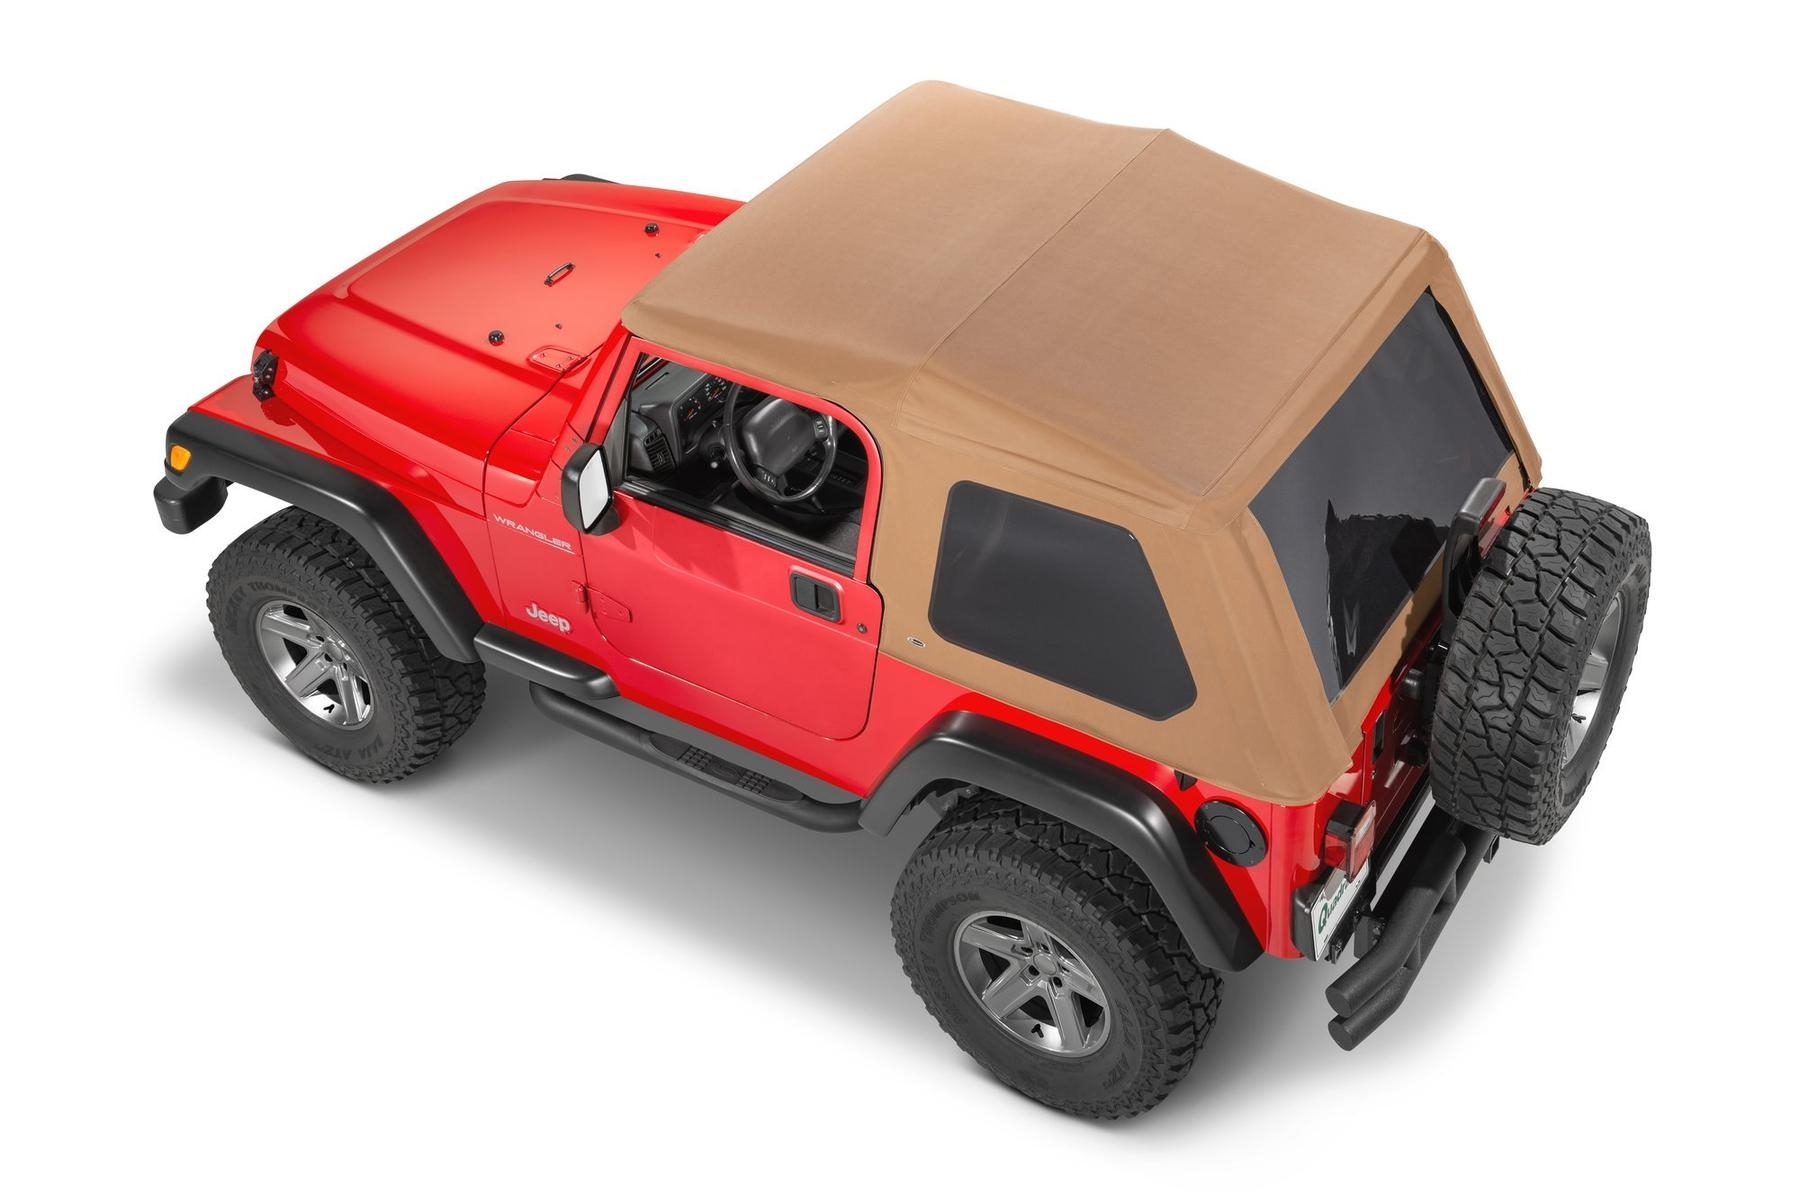 Mastertop Fast Back Fabric Replacement Top, No Doorskins, Tinted Glass For 97-06 Jeep Wrangler, in